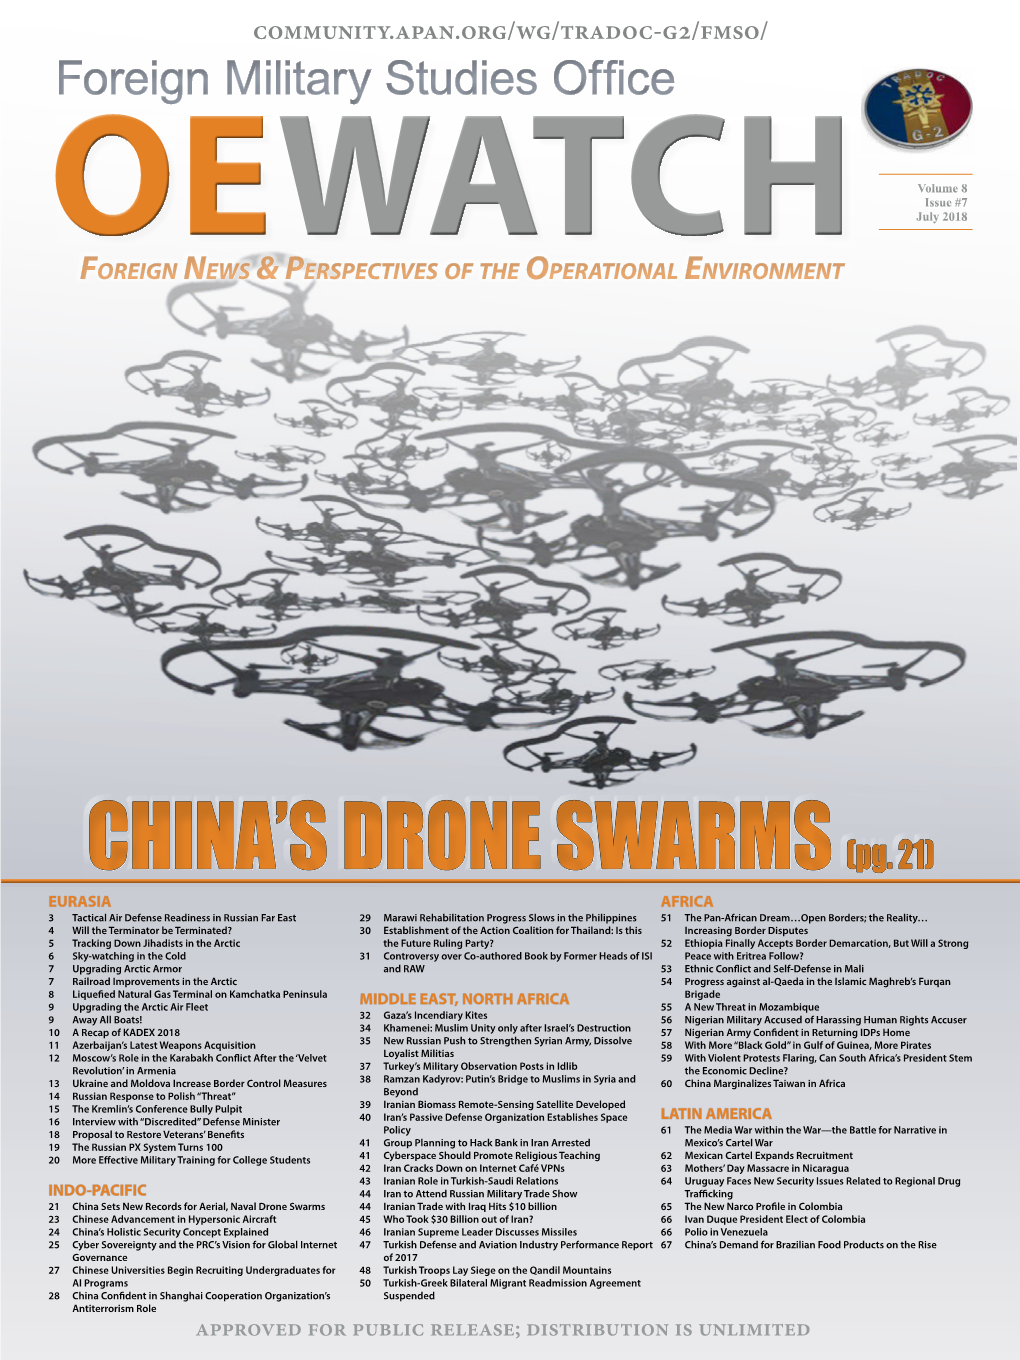 China's Drone Swarms